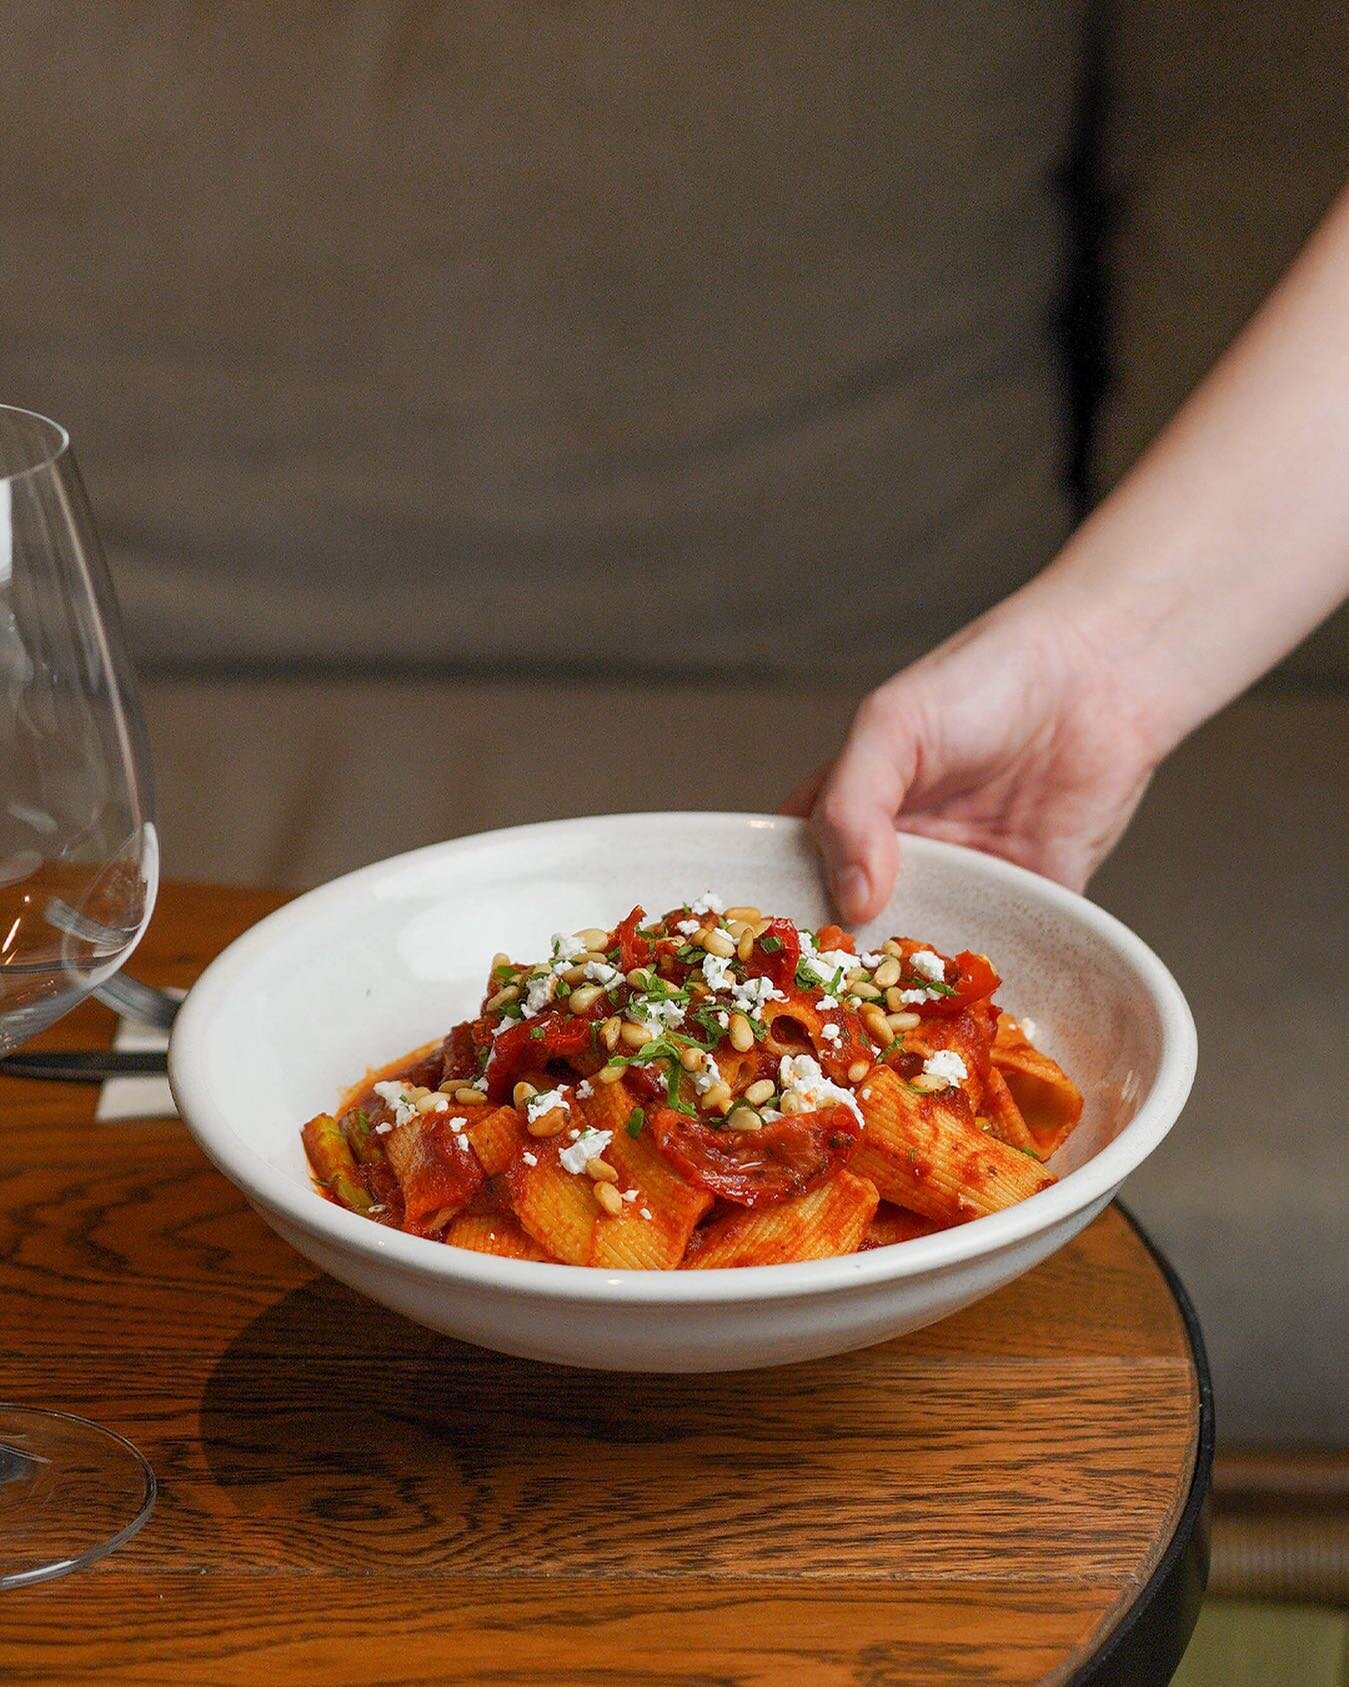 Indulge in the ultimate comfort food experience with our fresh pasta made from scratch! There's nothing quite like the satisfying texture and flavour of homemade pasta, and we've taken it to the next level with our Arrabbiata Rigatoni.

Picture this: